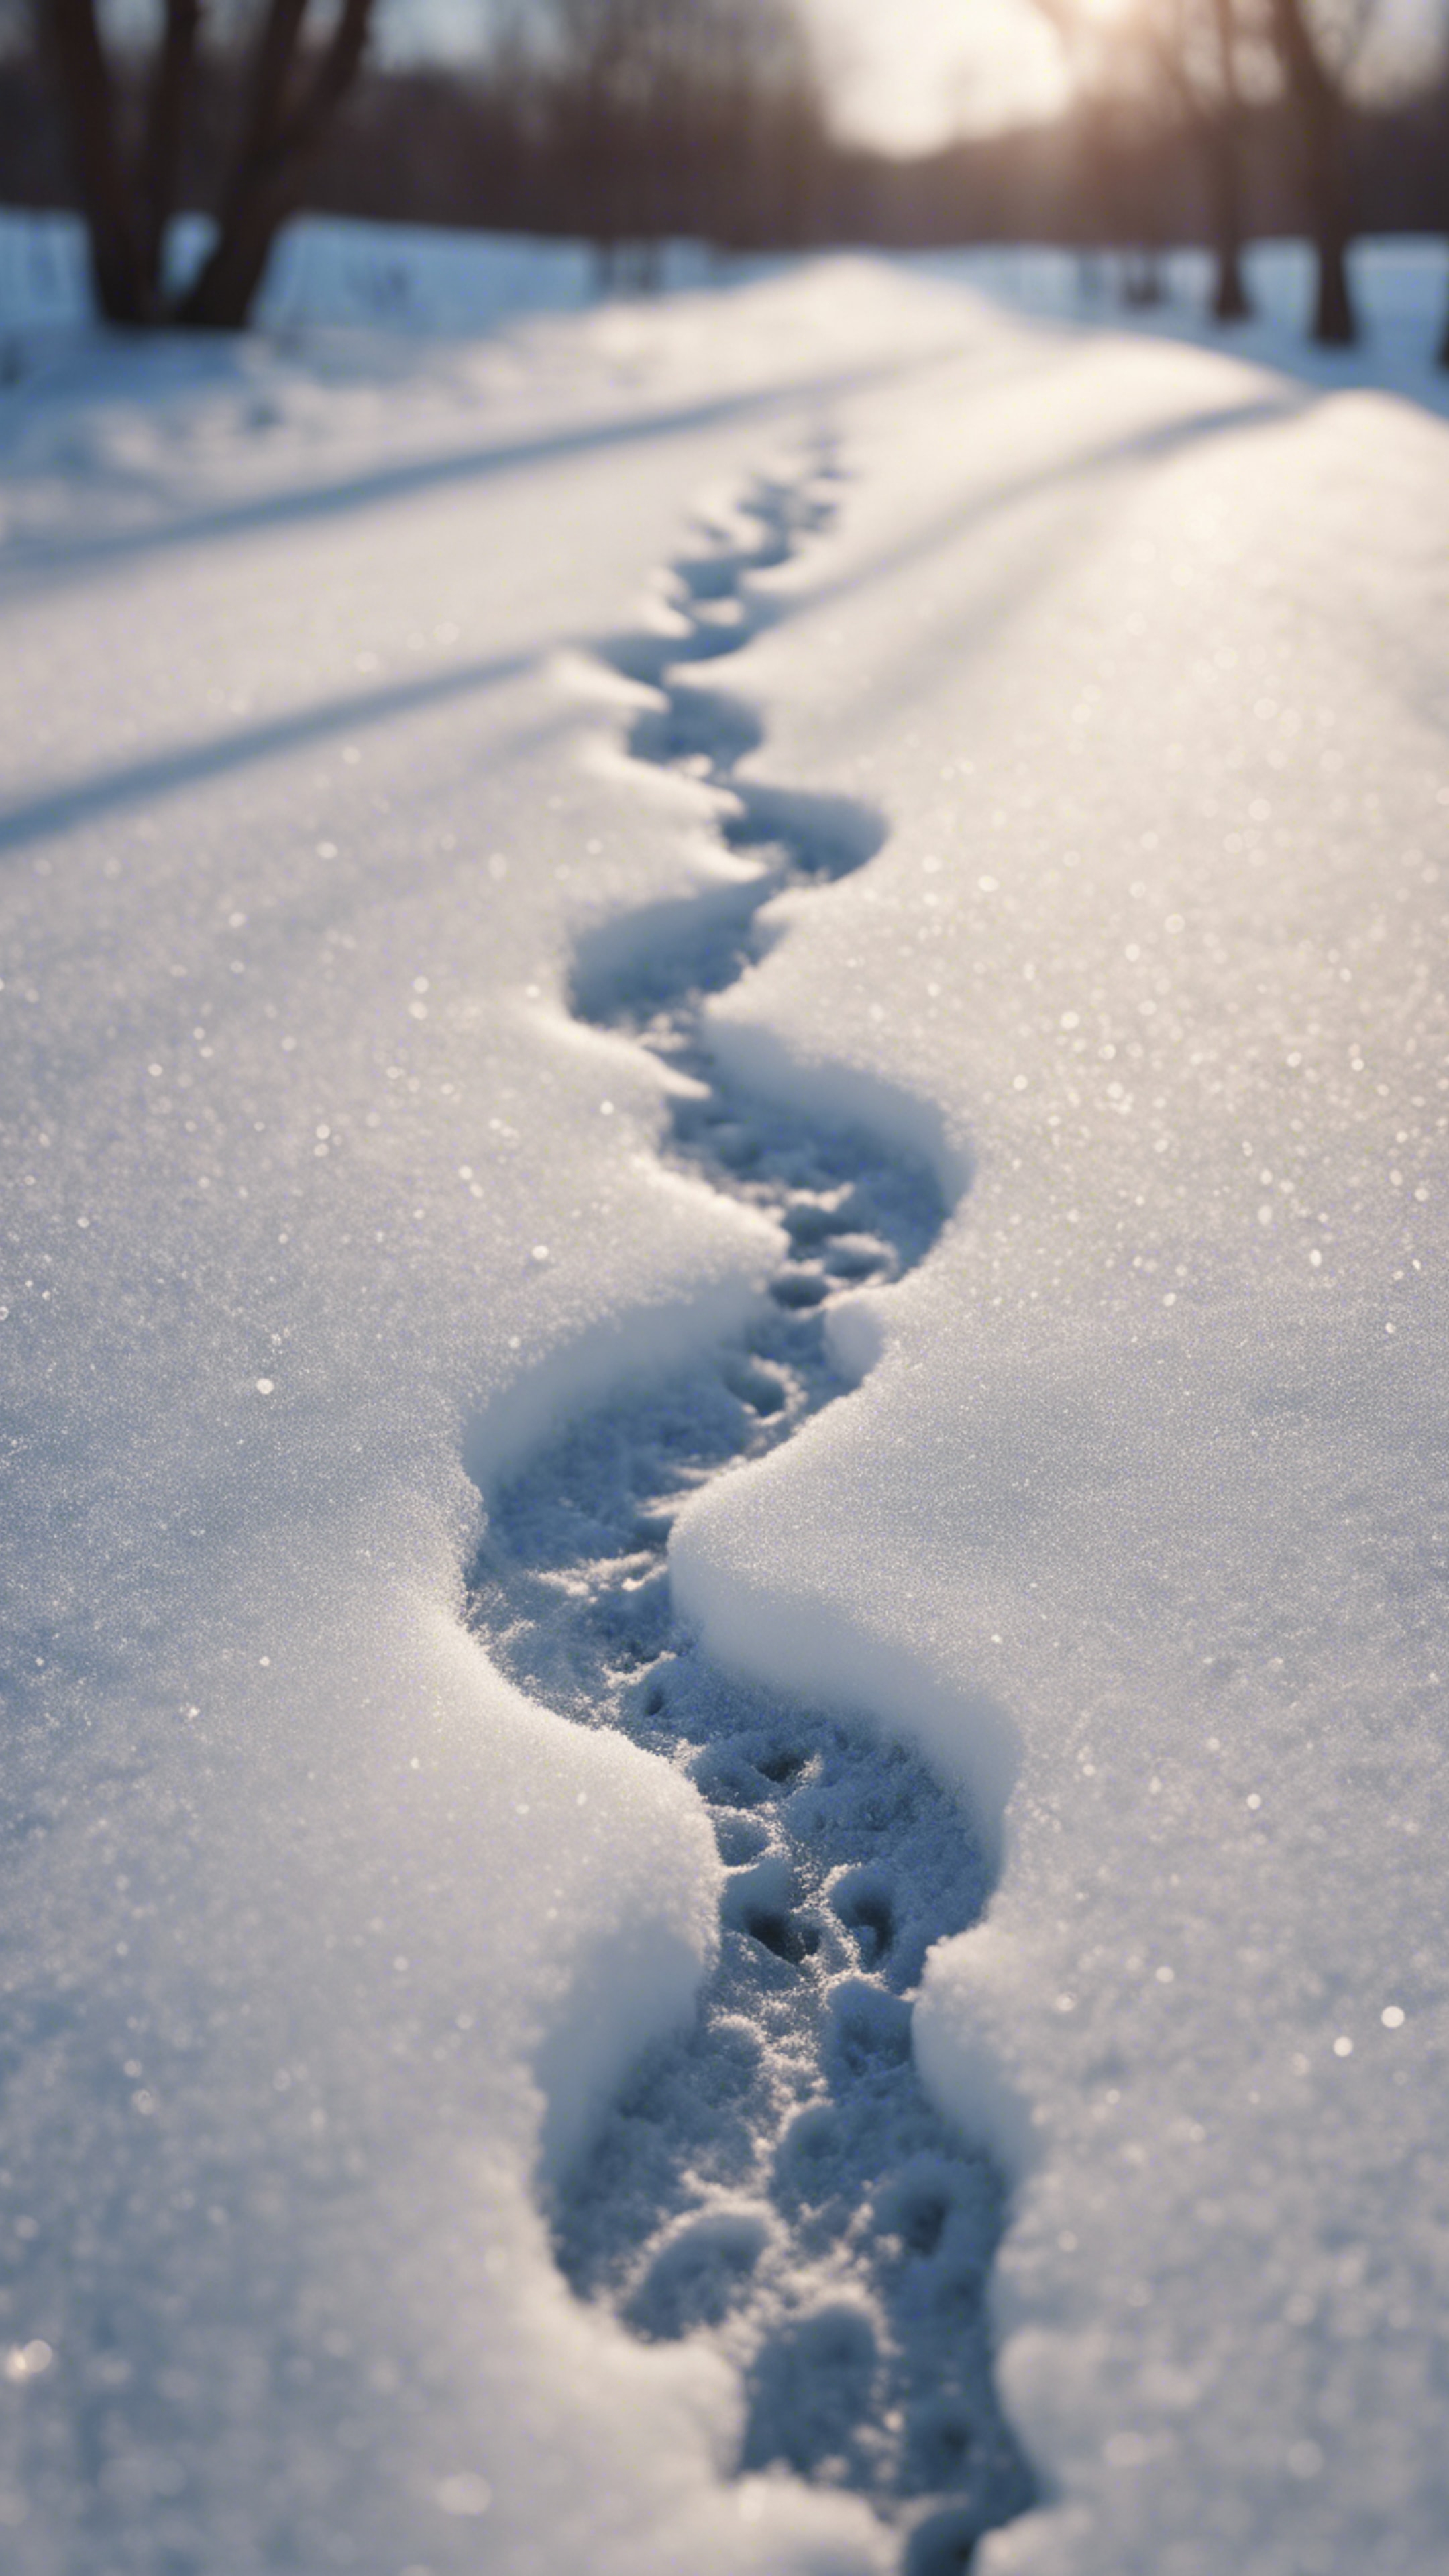 A pair of frosty, heart-shaped footprints imprinted on a snow-covered lane, symbolizing love in winter. 牆紙[a9223da6c59742c6a00f]